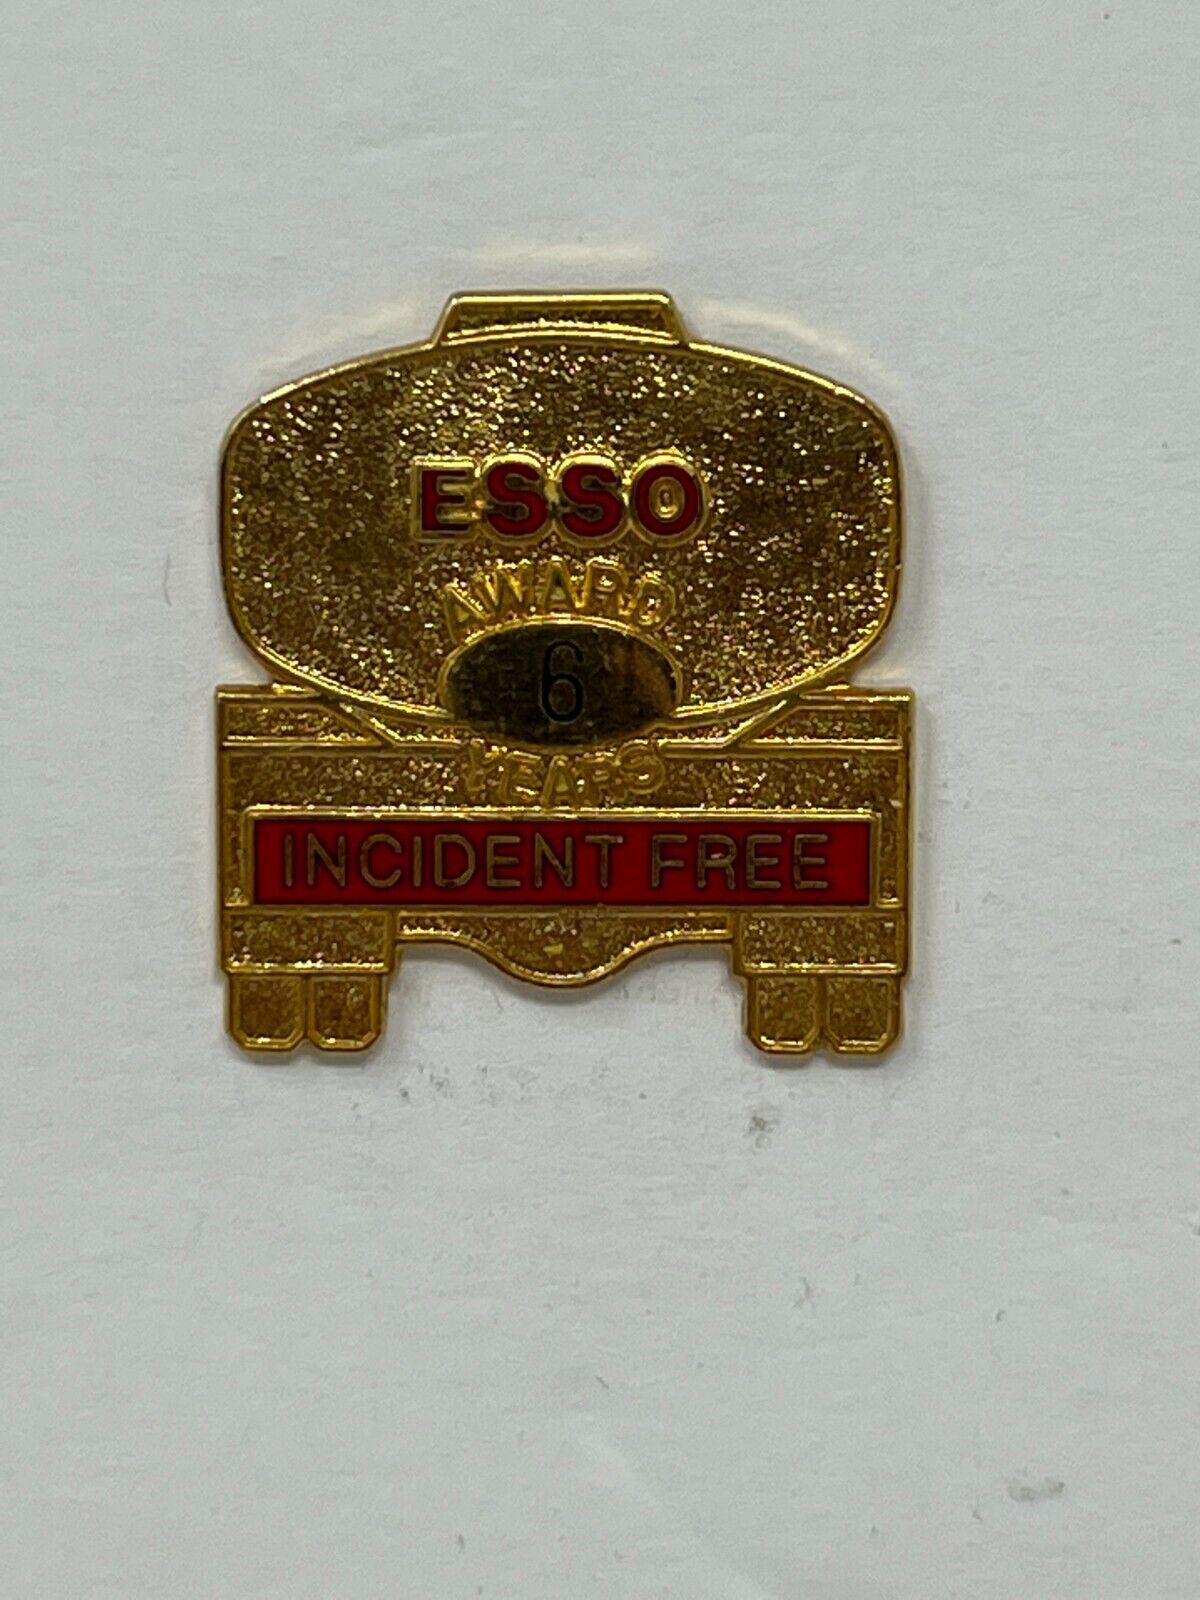 Esso Incident Free Award 6 Year Gas & Oil Lapel Pin